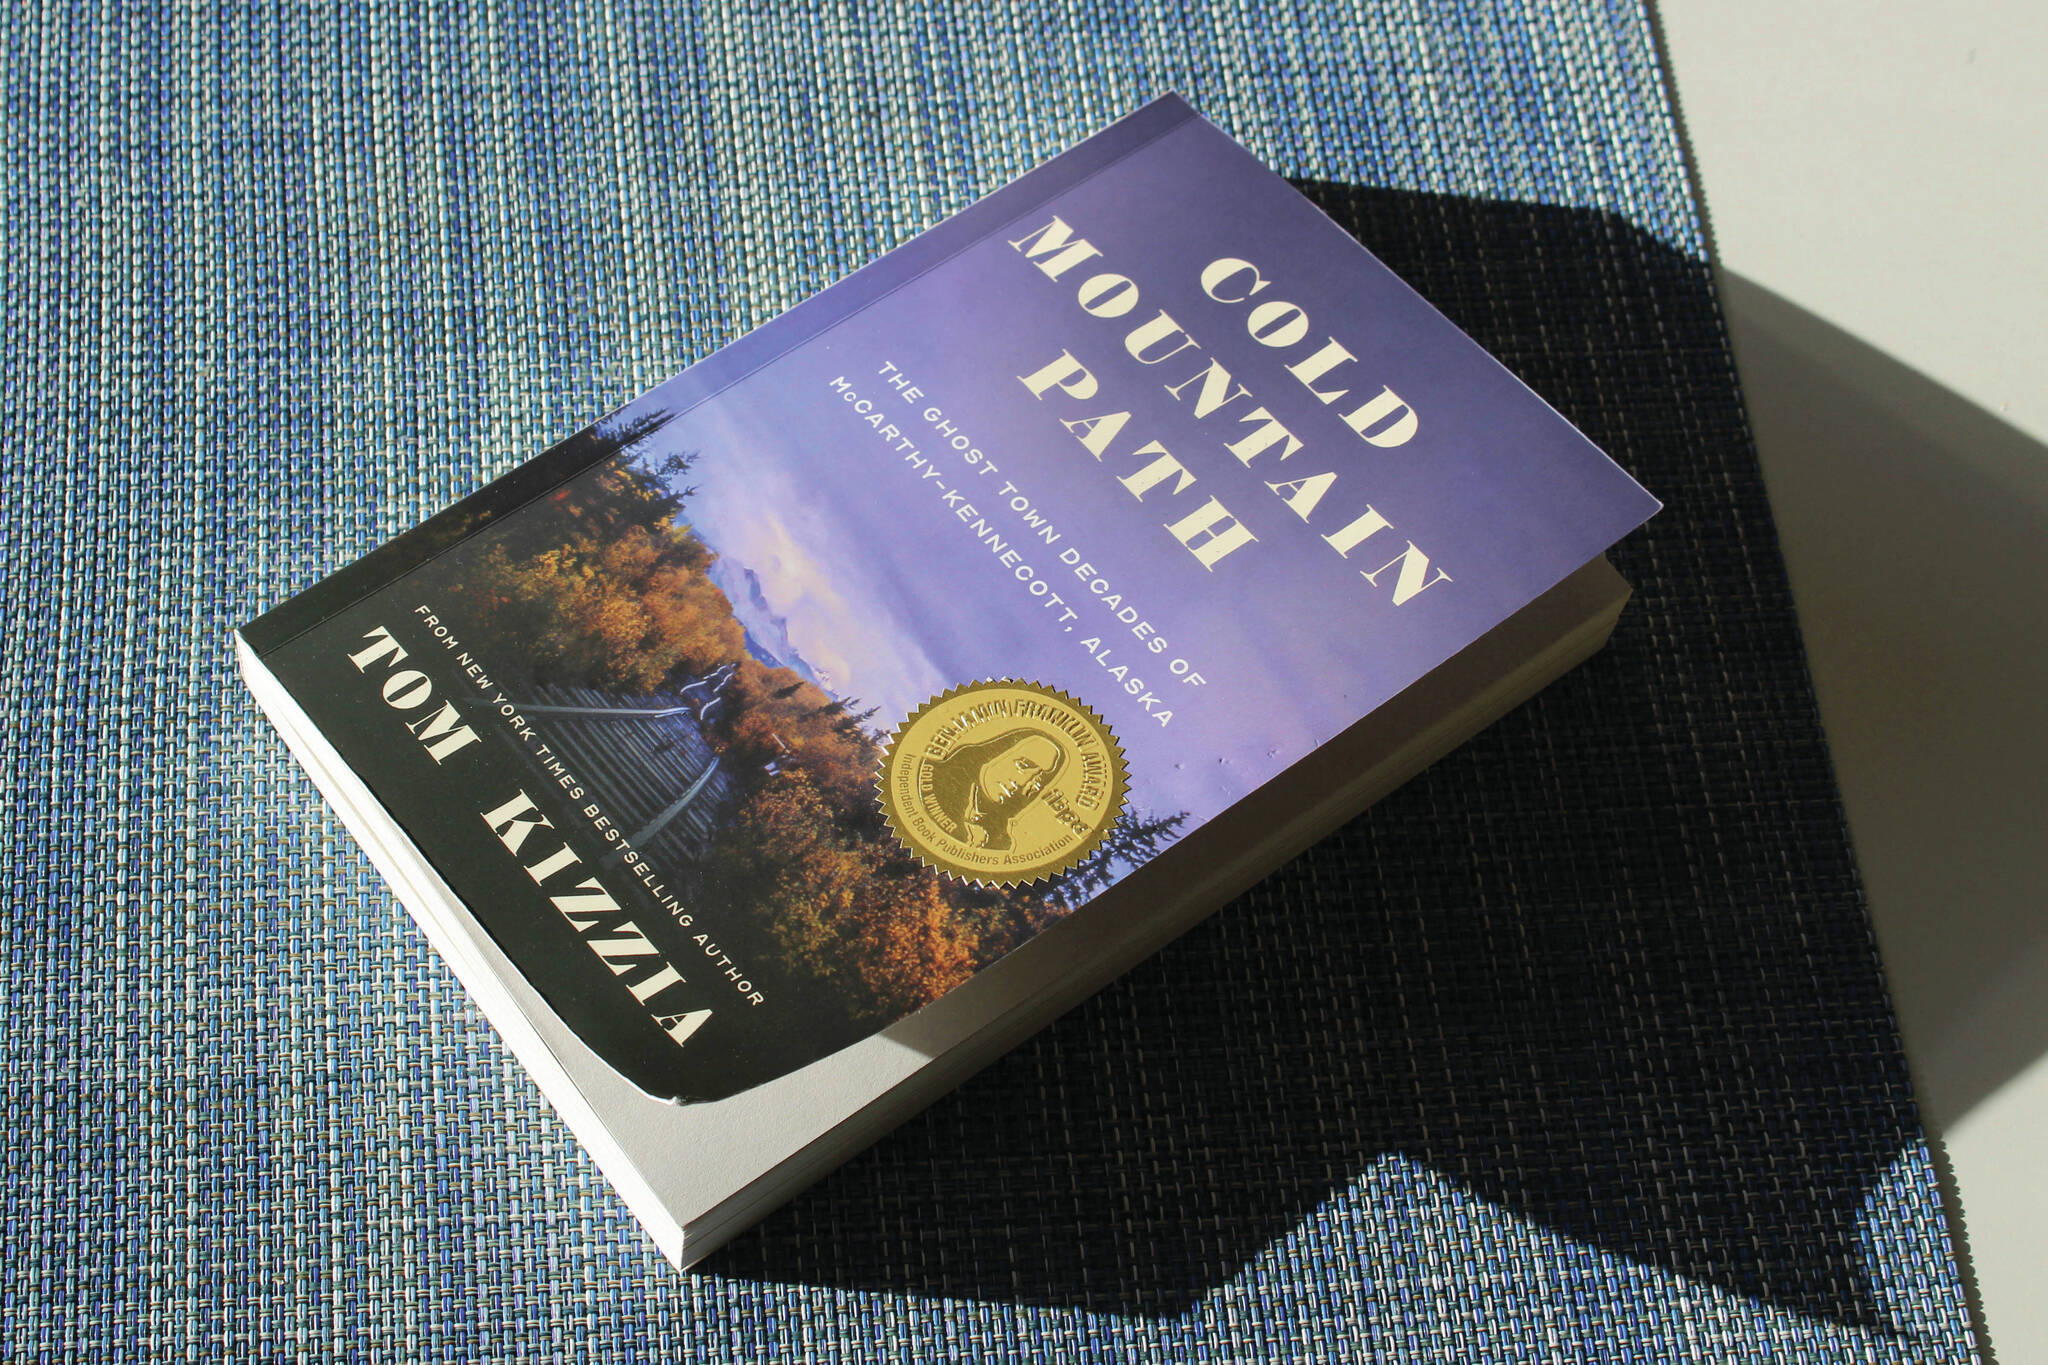 A copy of Tom Kizzia’s “Cold Mountain Path” rests on a table on Thursday in Juneau. (Ashlyn O’Hara/Peninsula Clarion)